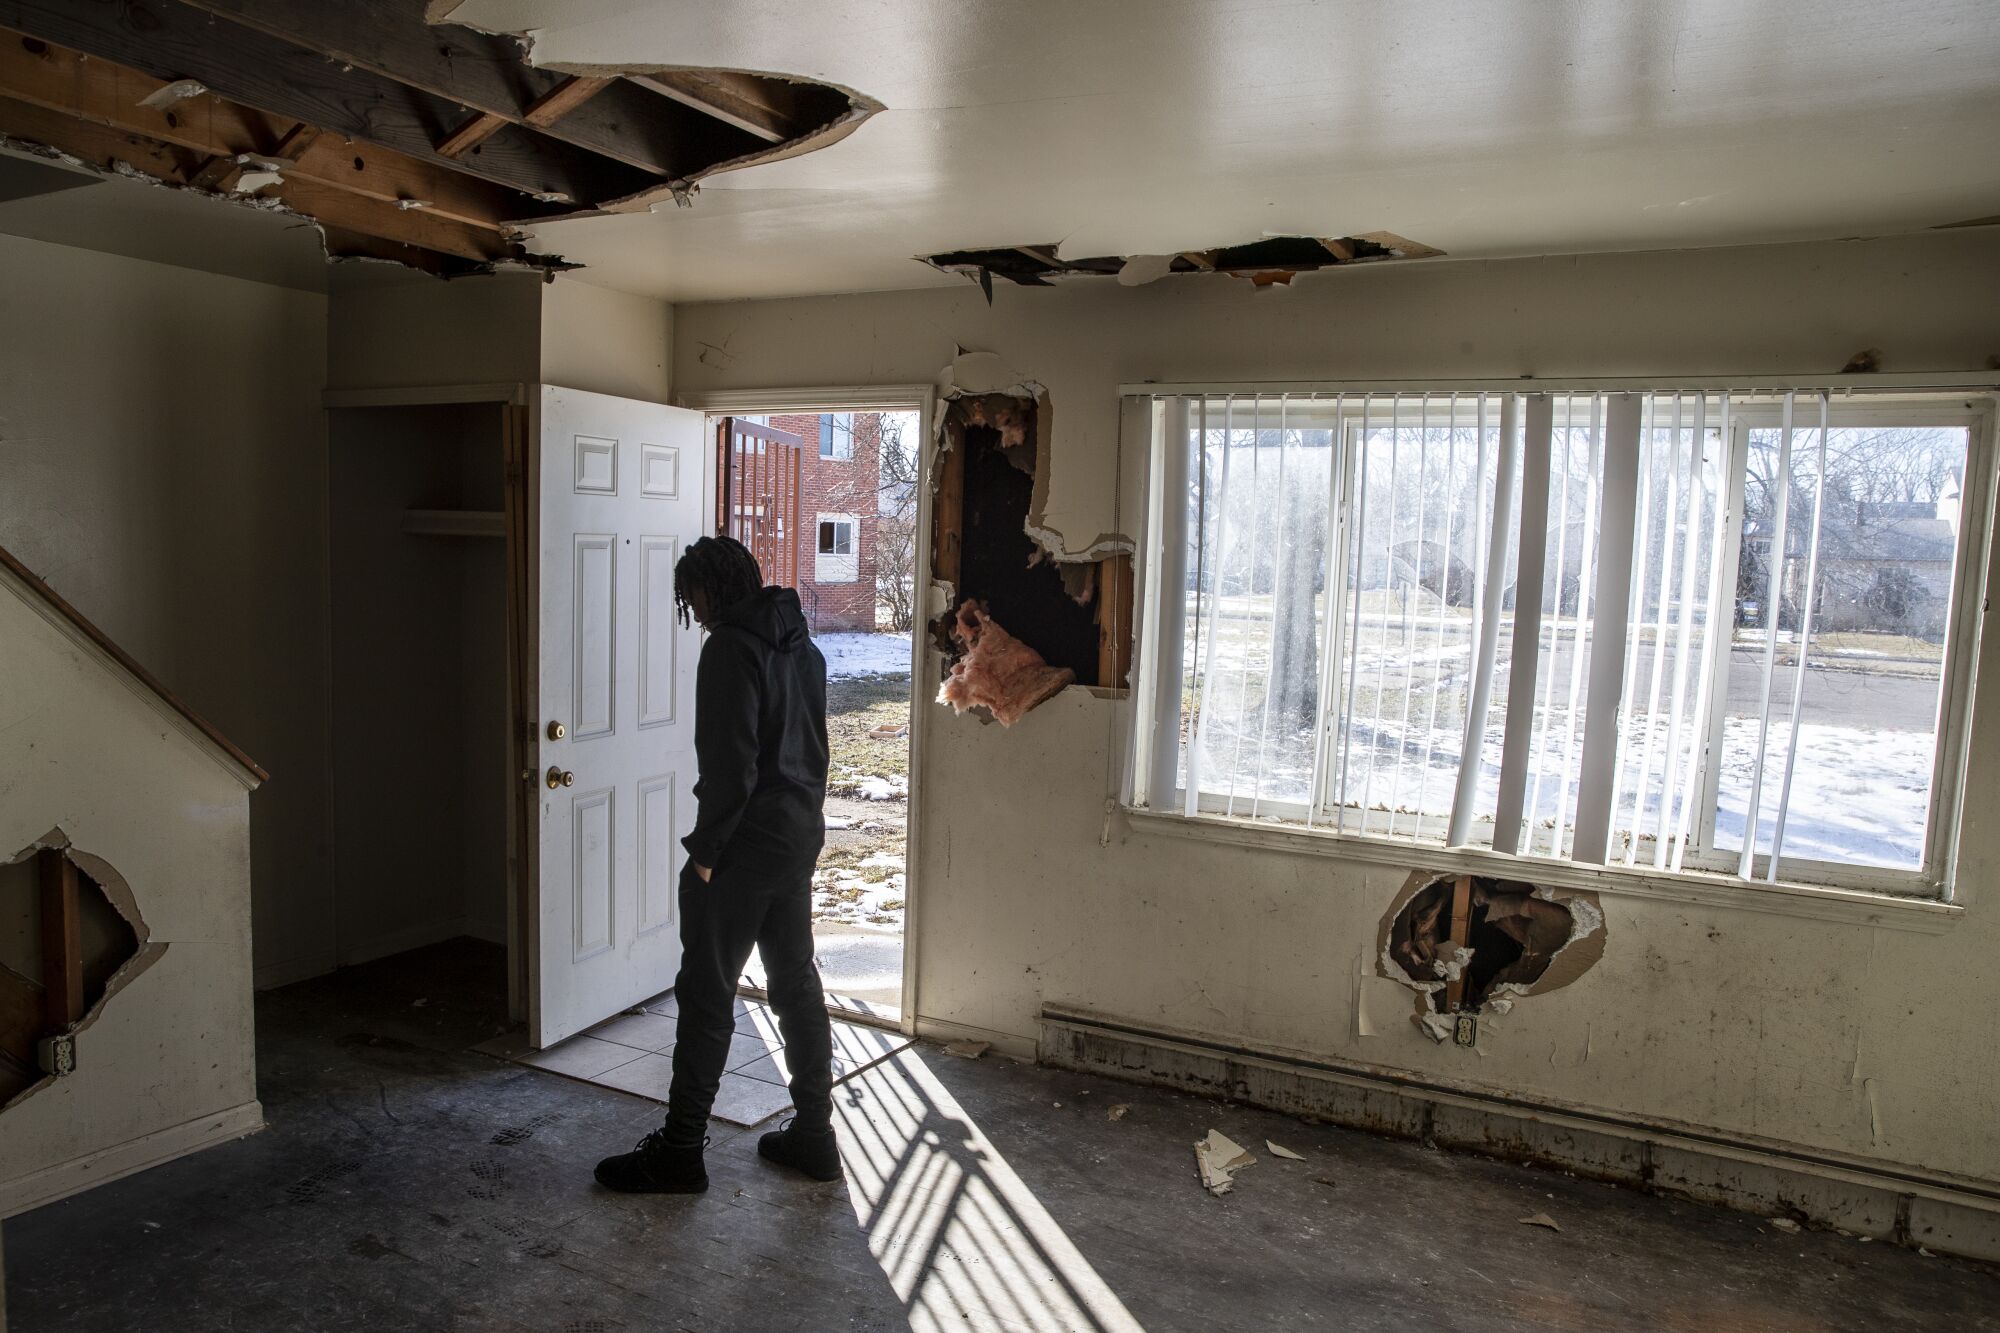 Flint basketball player Onquay Clemons walks into the abandoned, dilapidated remains of his boyhood home.